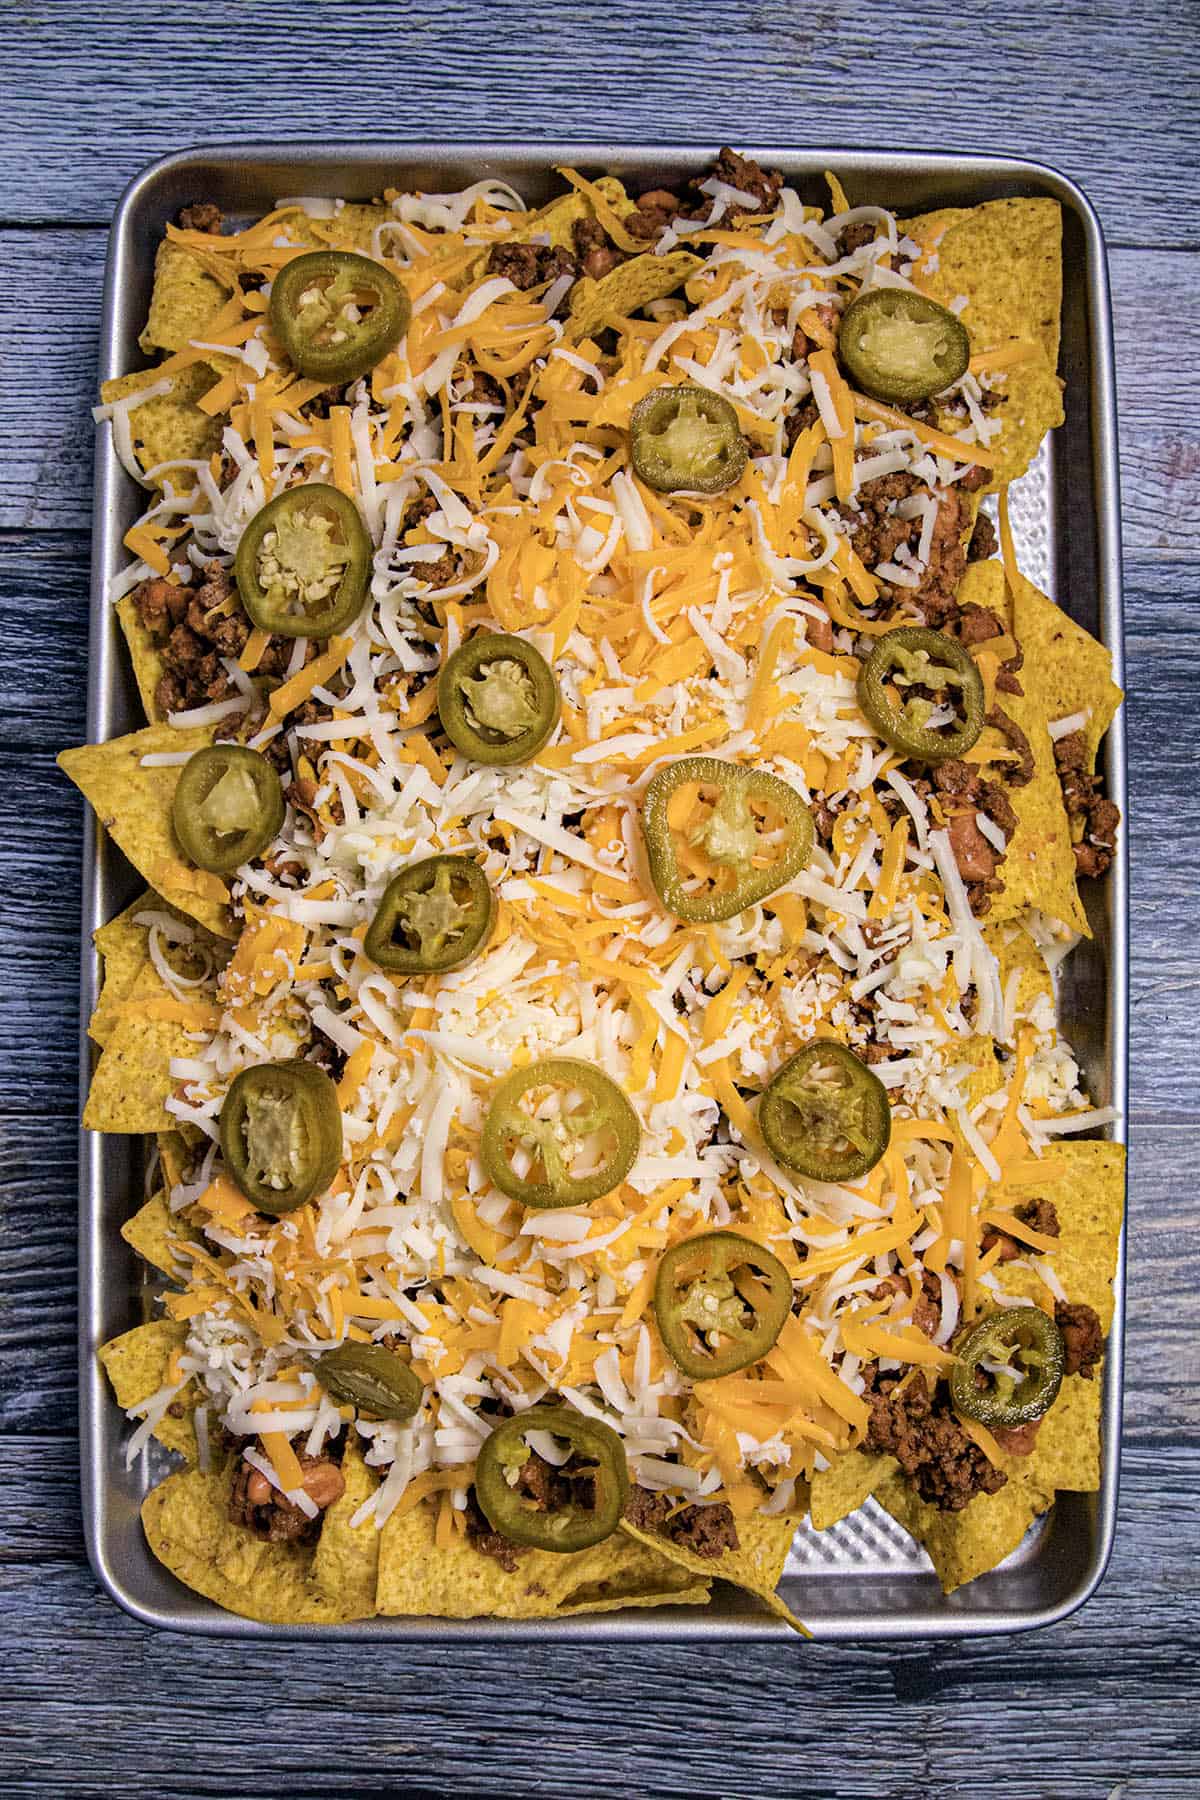 Topping the nachos with pickled jalapenos